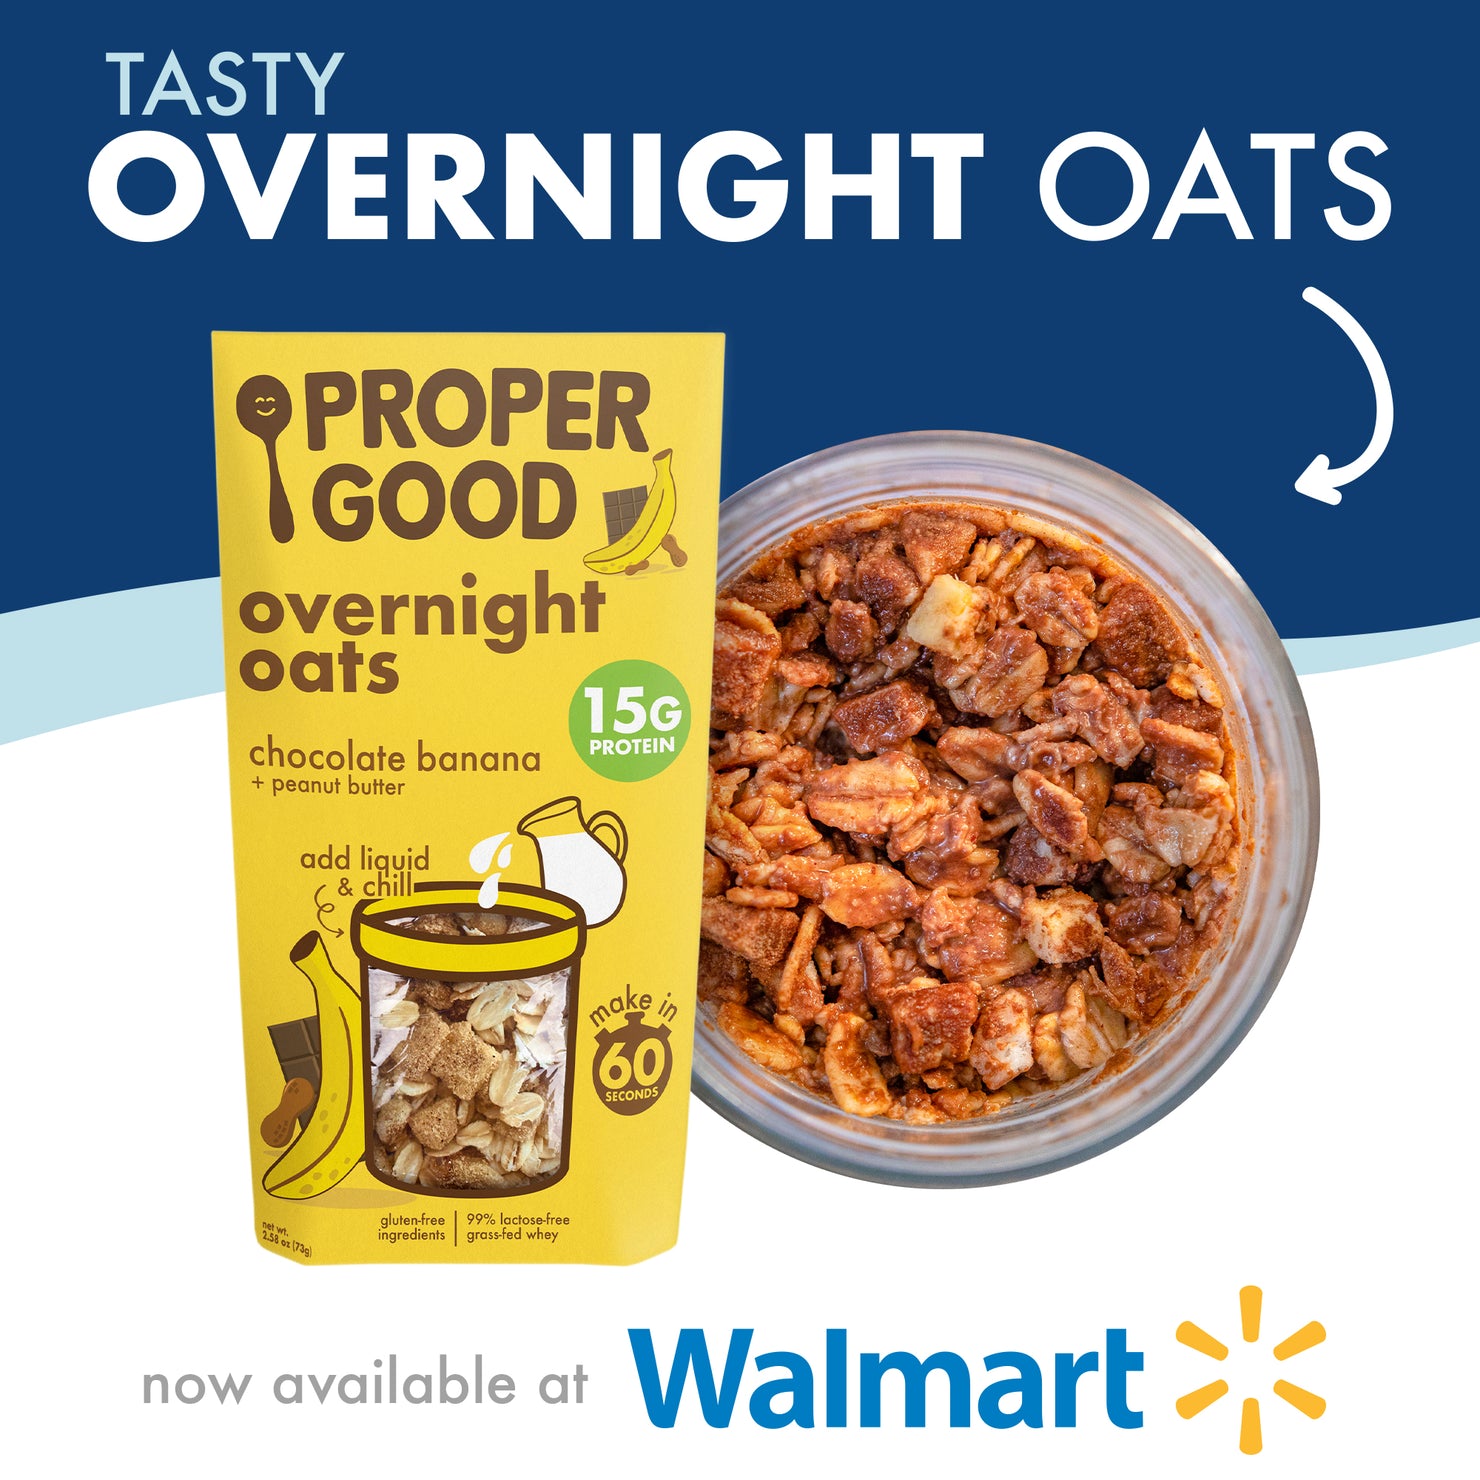 Chocolate, Peanut Butter & Banana Protein Overnight Oats Available in Walmart - Proper Good